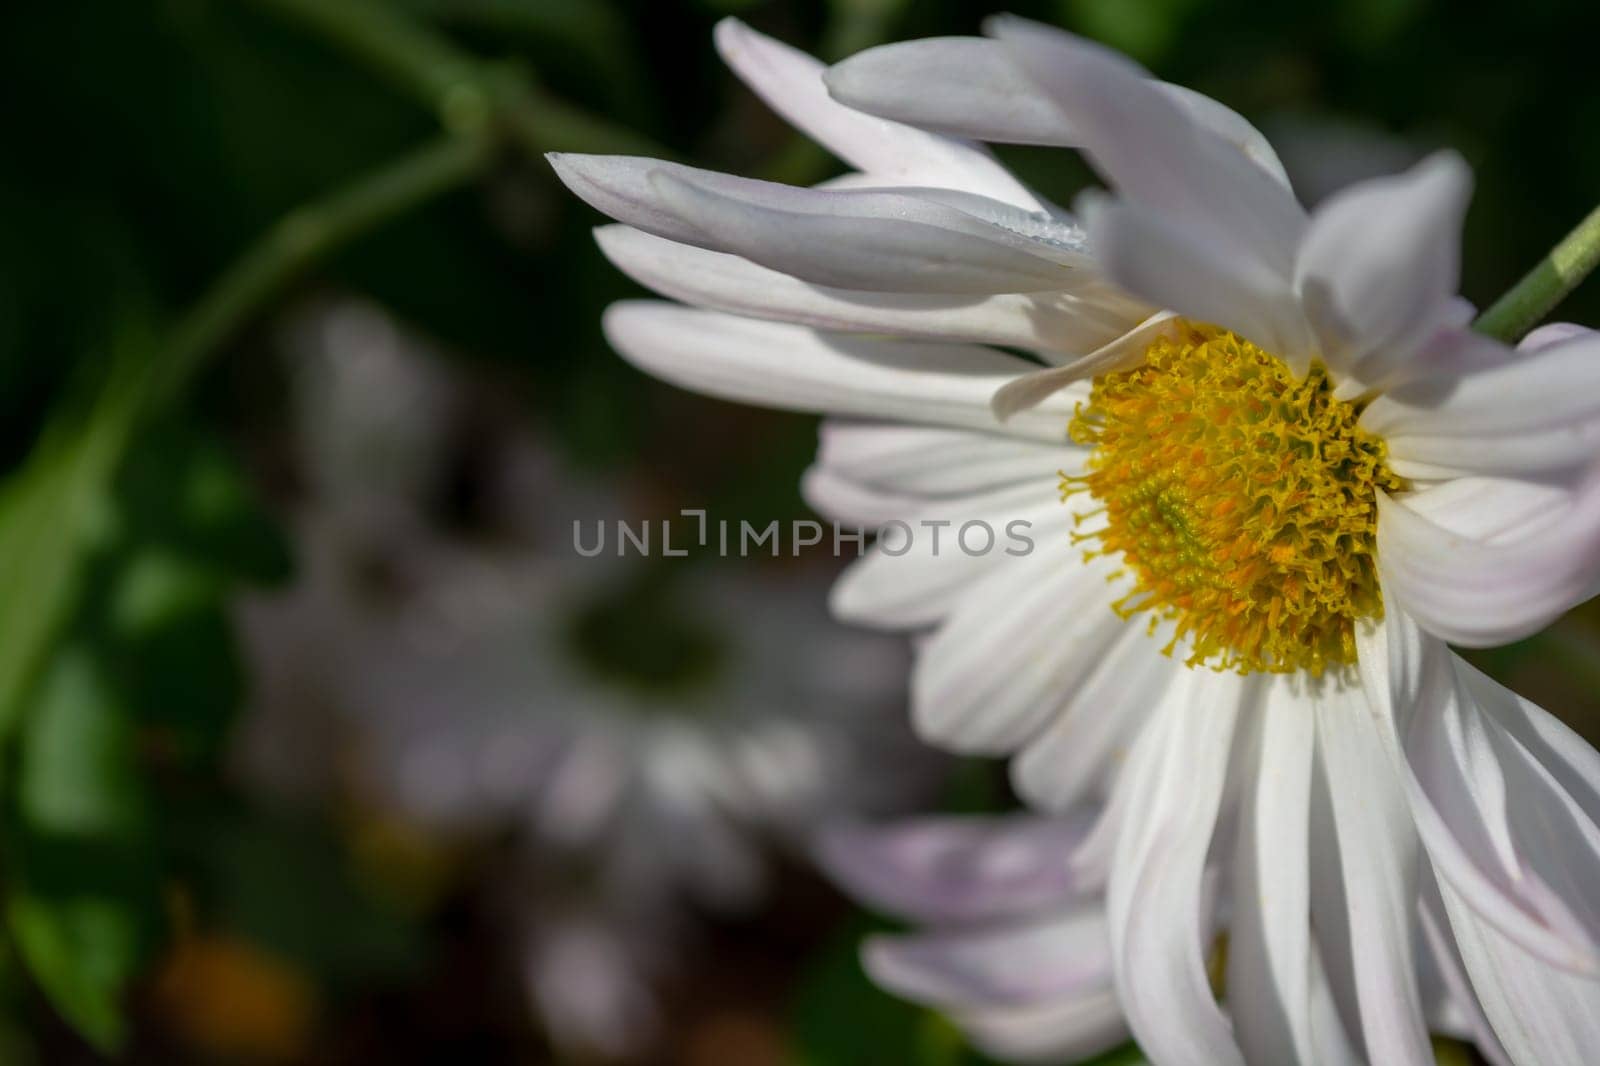 Large white chrysanthemum in the garden on a dark blurred background of greenery.